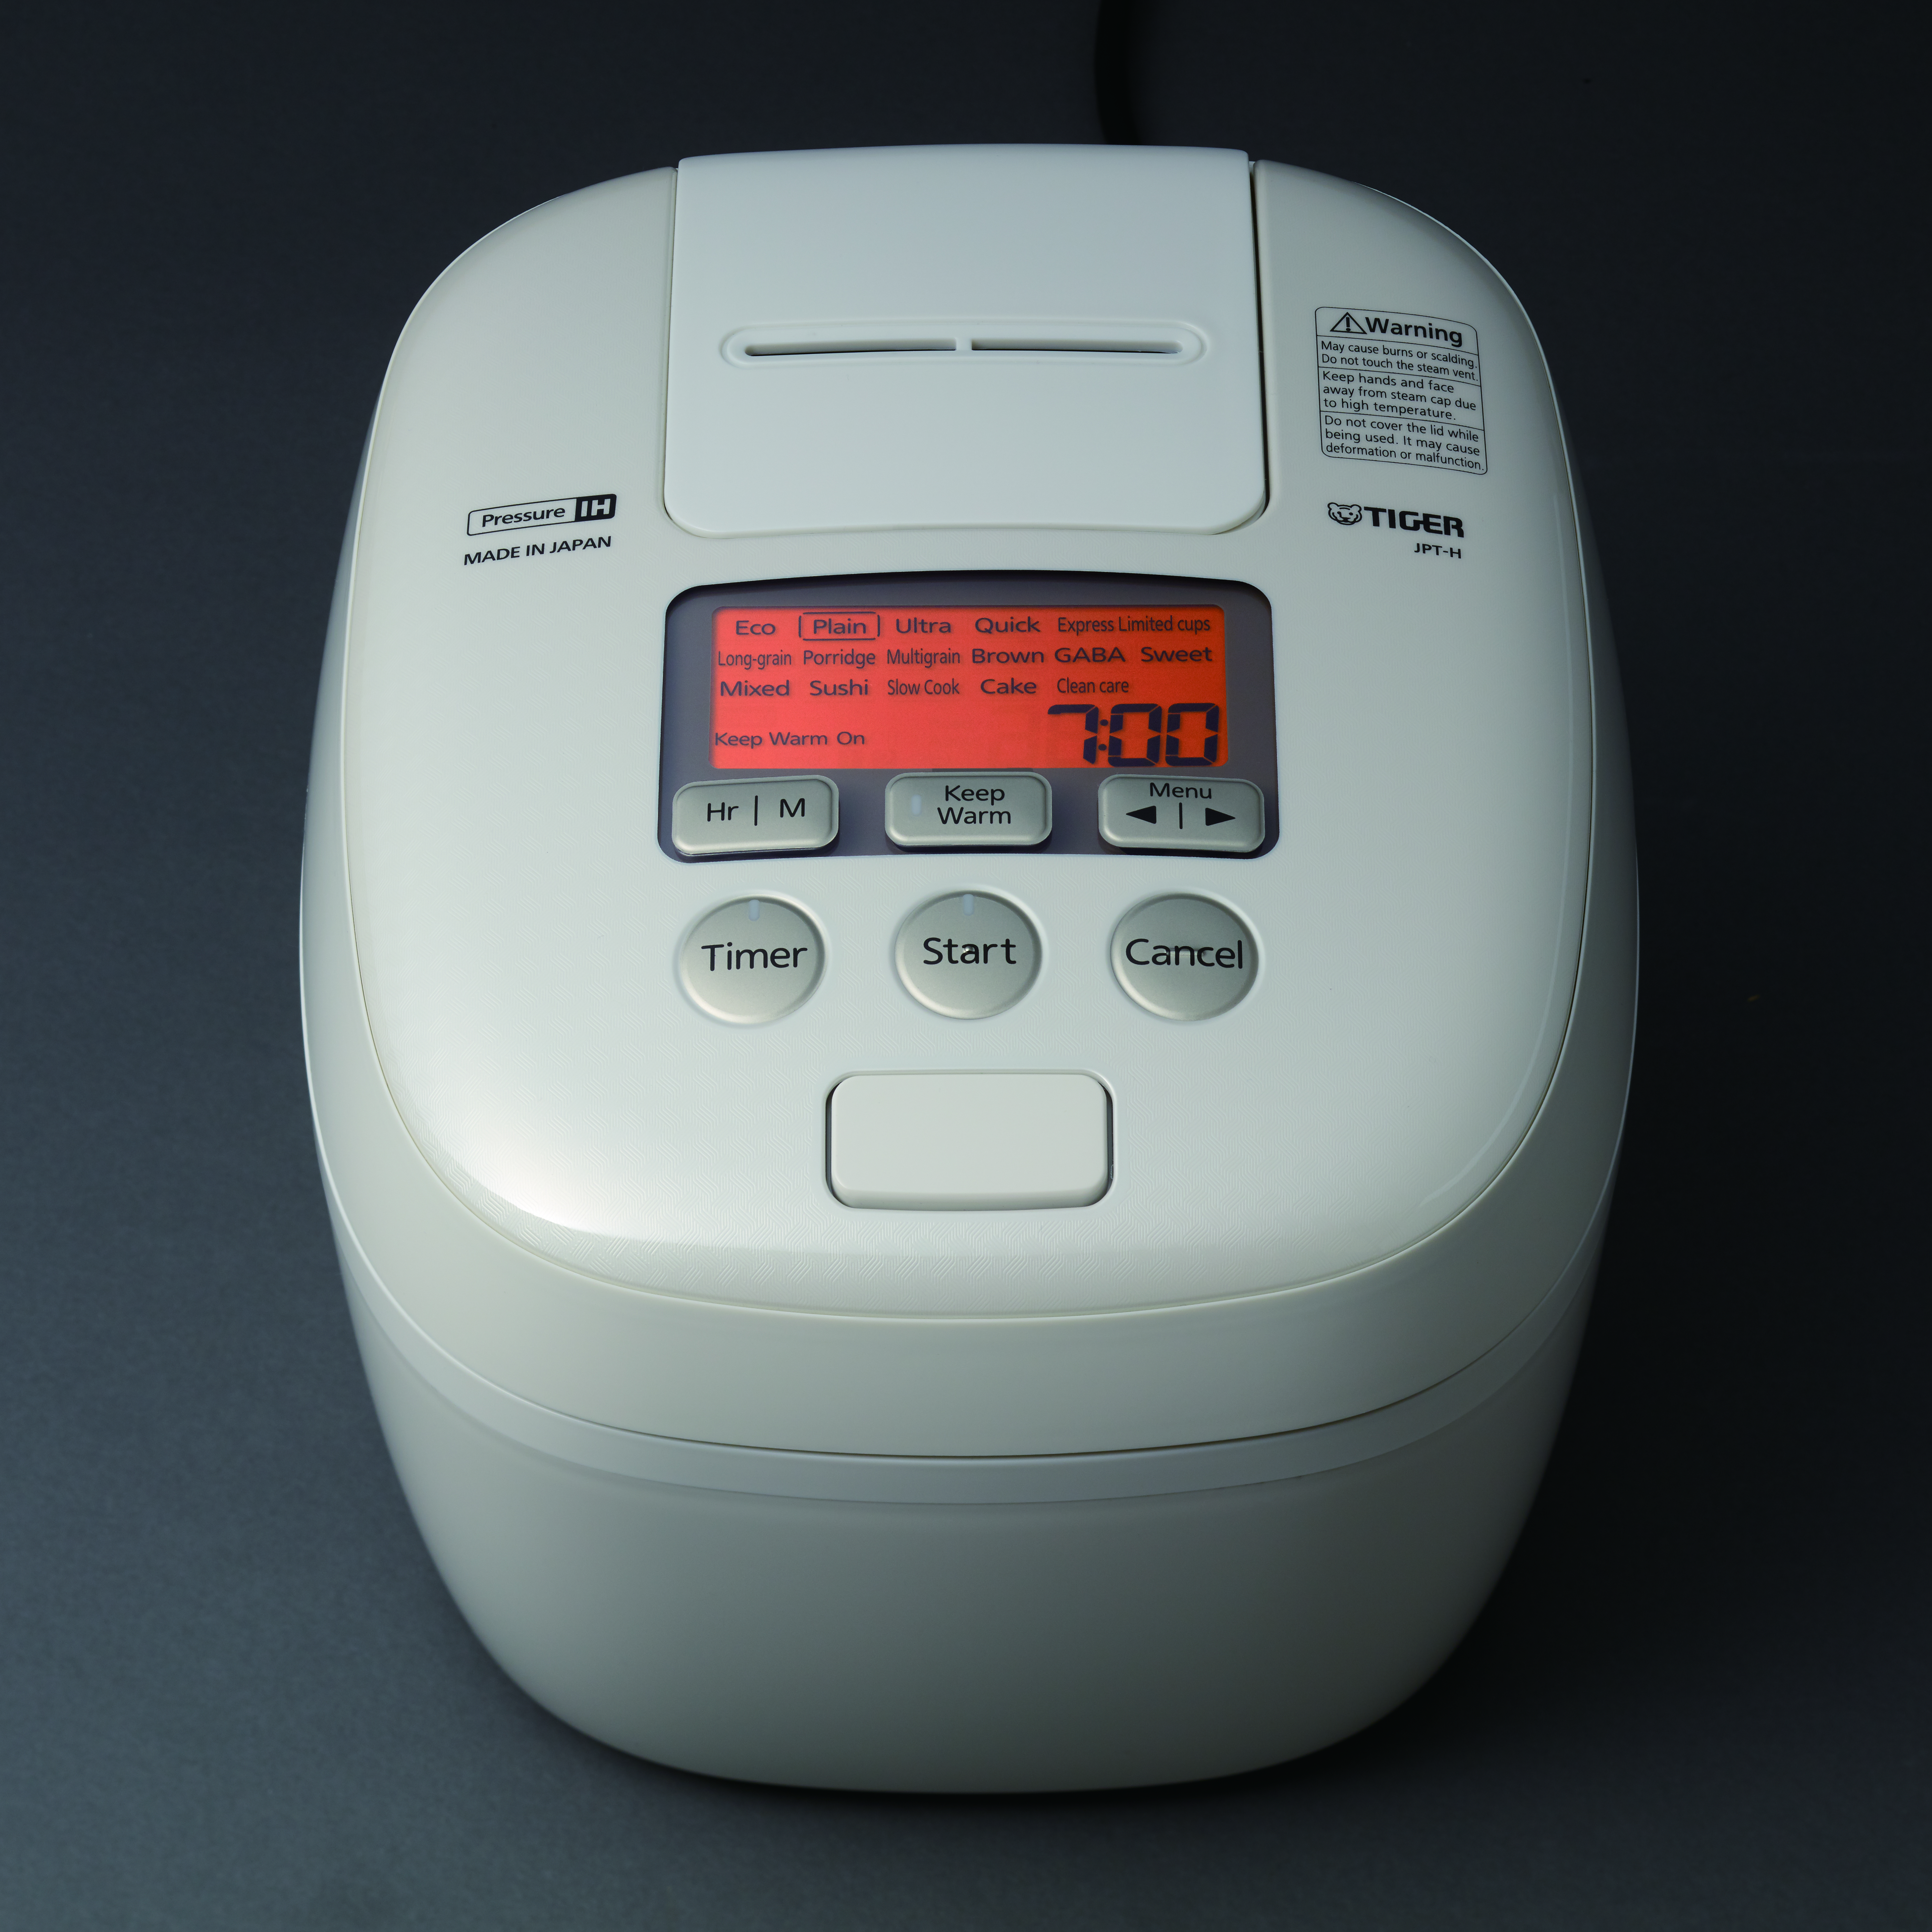 made-in-japan-double-pressure-induction-heating-rice-cooker-jpt-h-clear-orange-lcd.jpg (22.23 MB)